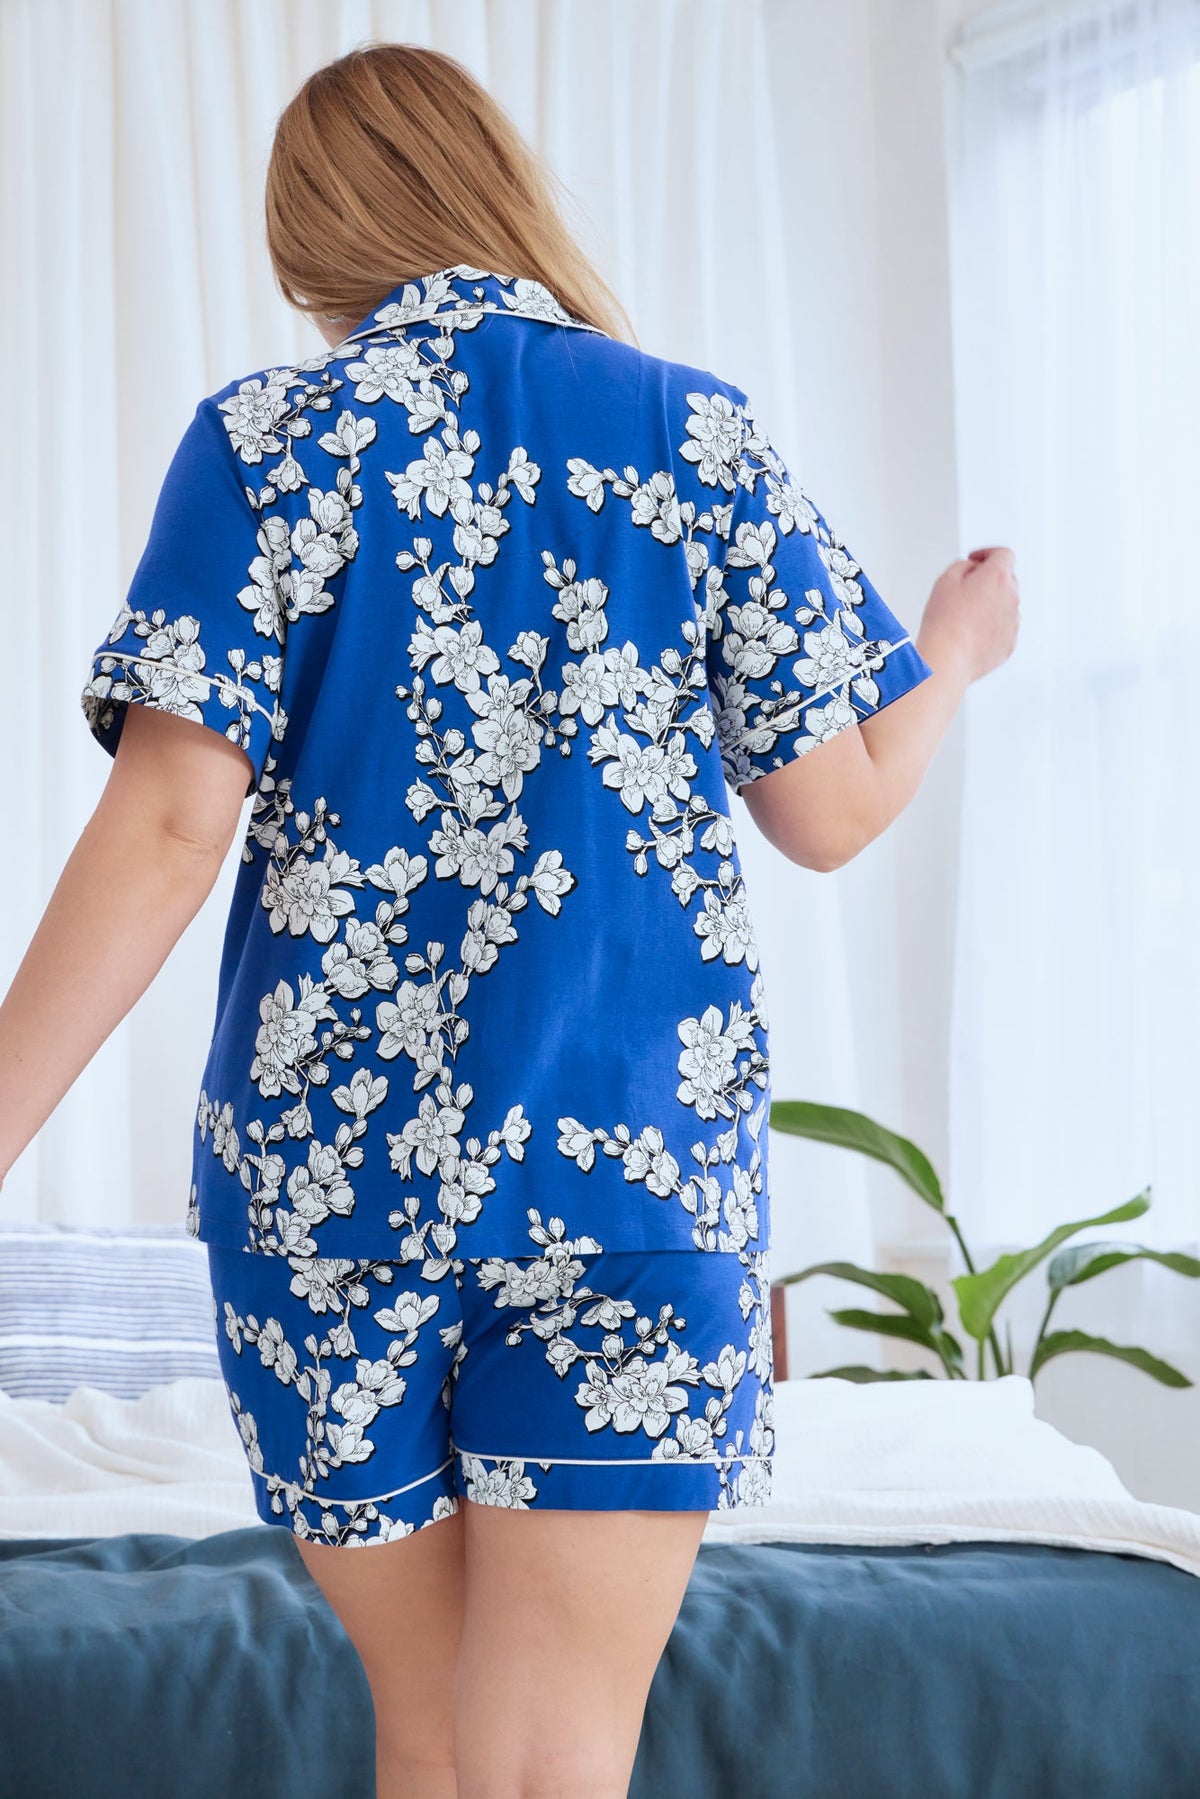 A lady wearing a blue short sleeve shorty plus size pj set with white blossom pattern.